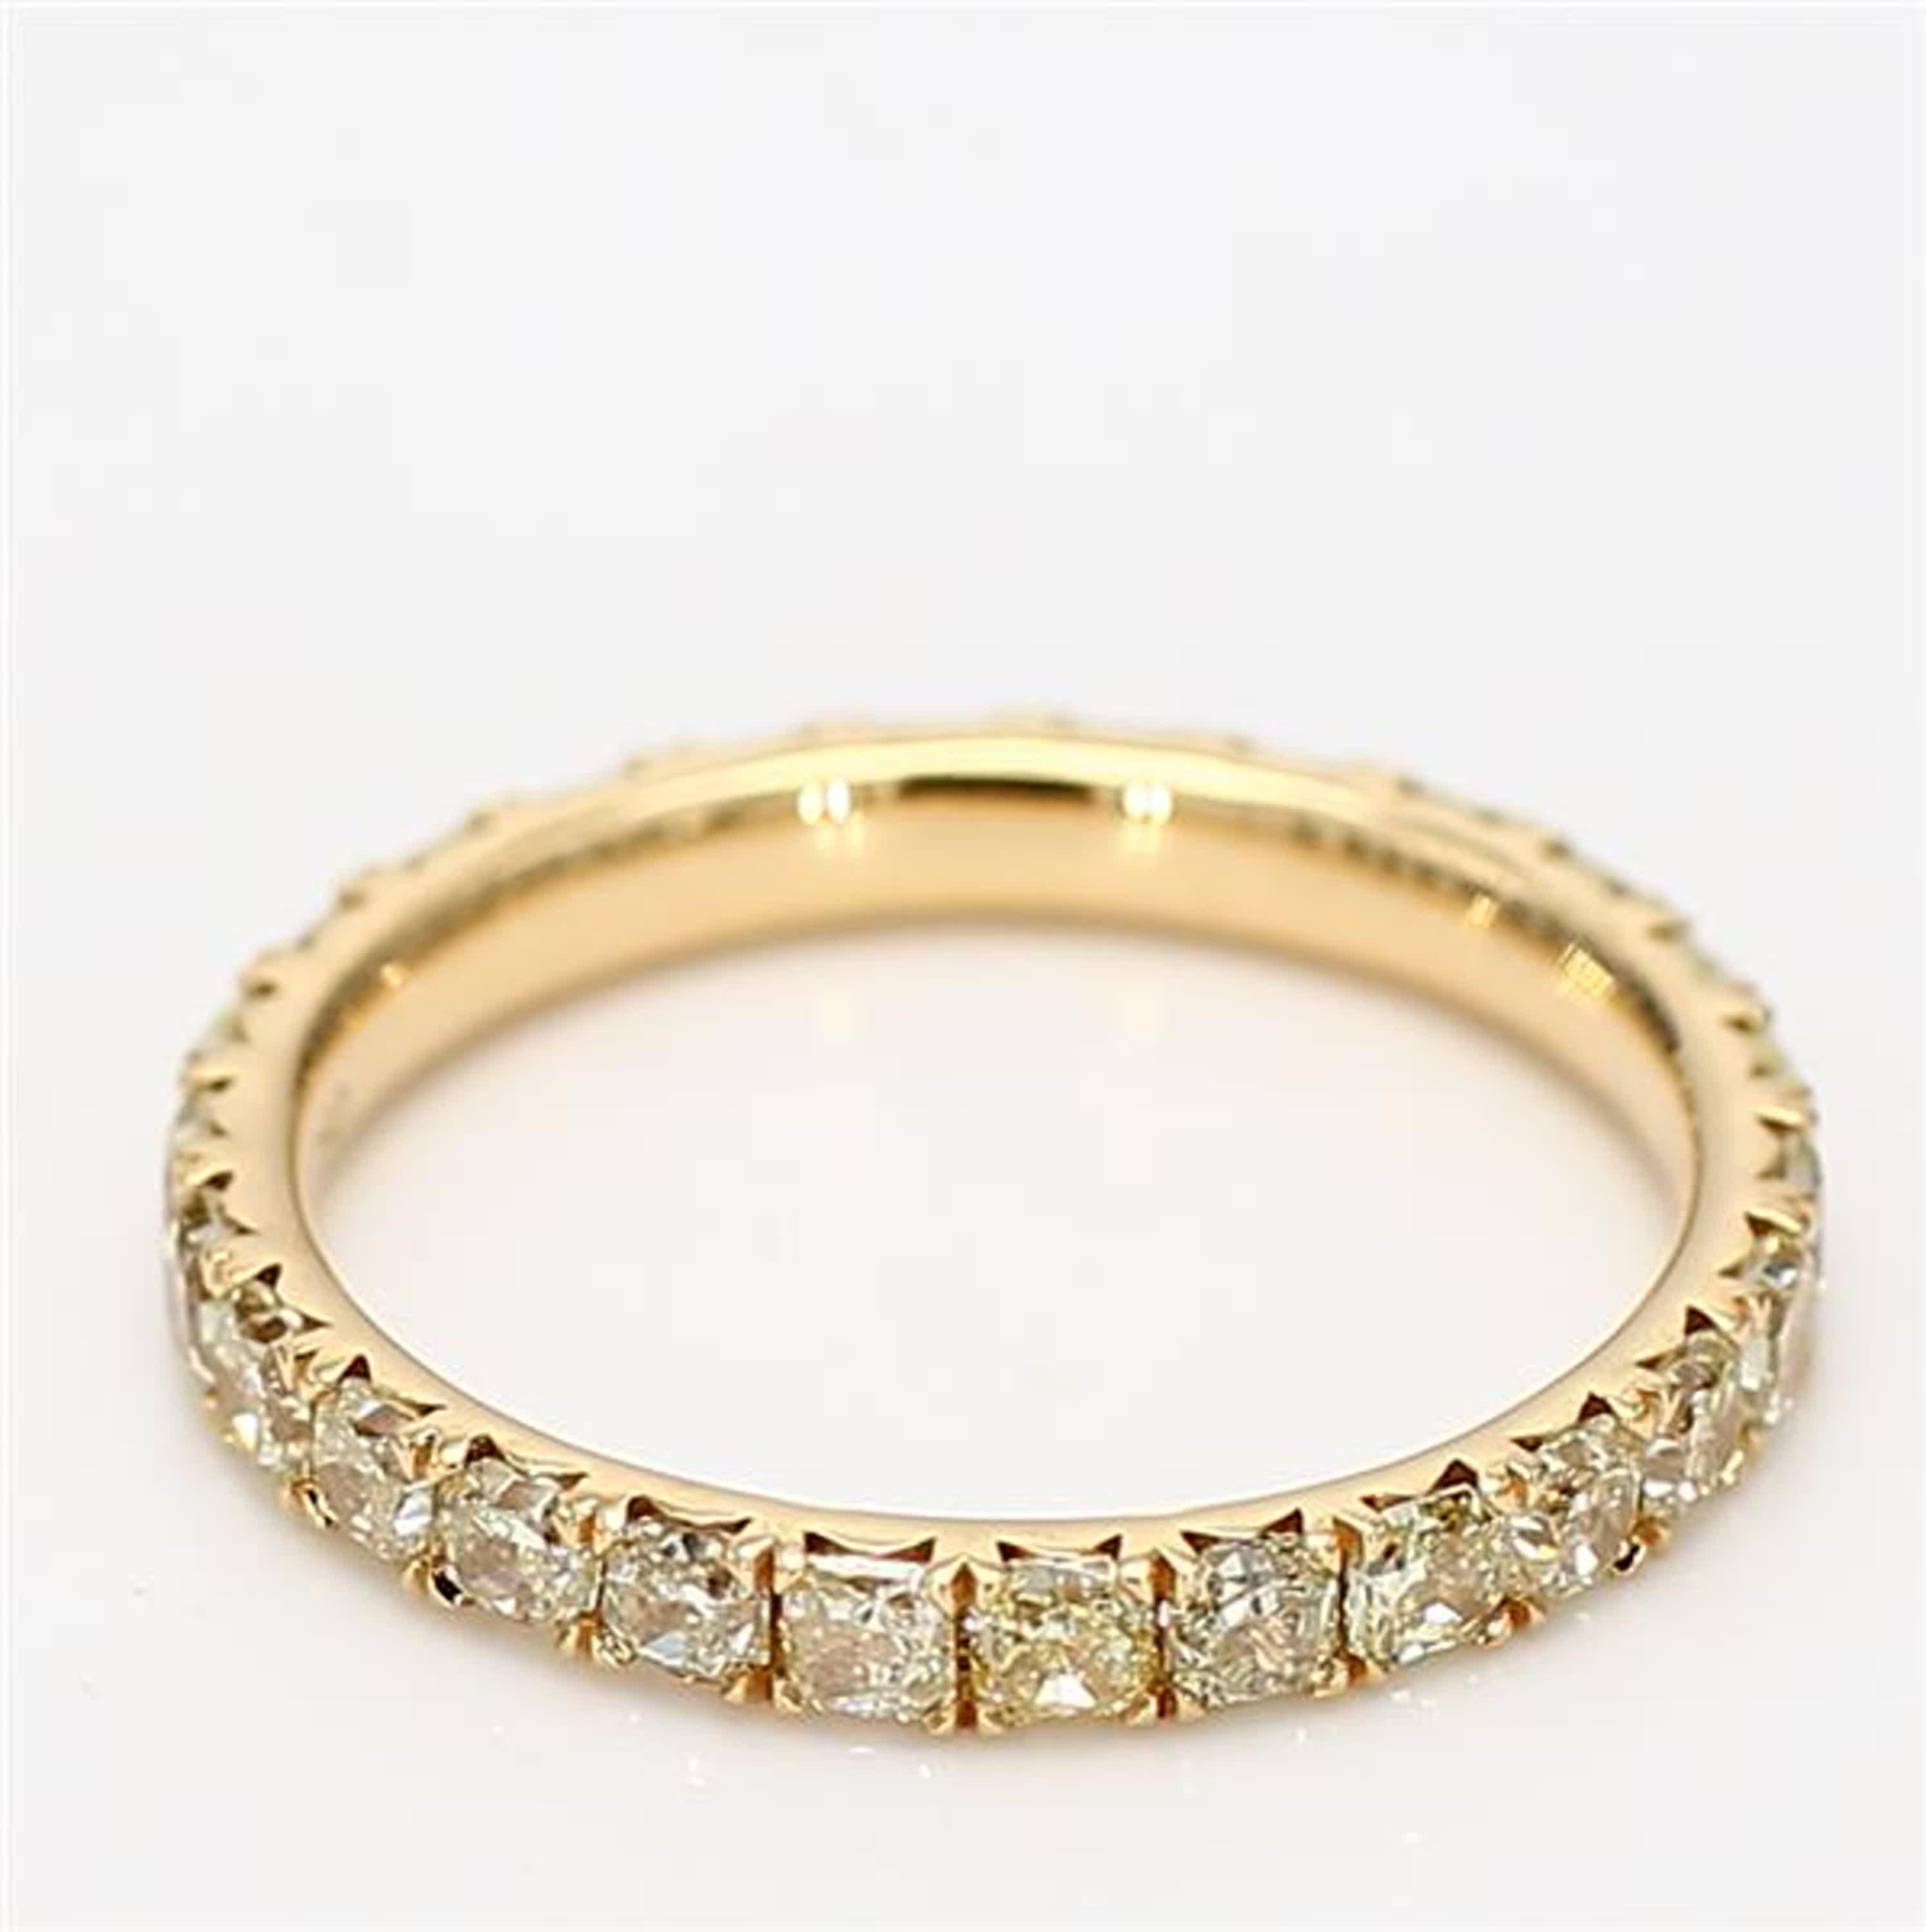 Radiant Cut Natural Yellow Radiant Diamond 1.66 Carat TW Yellow Gold Eternity Band For Sale